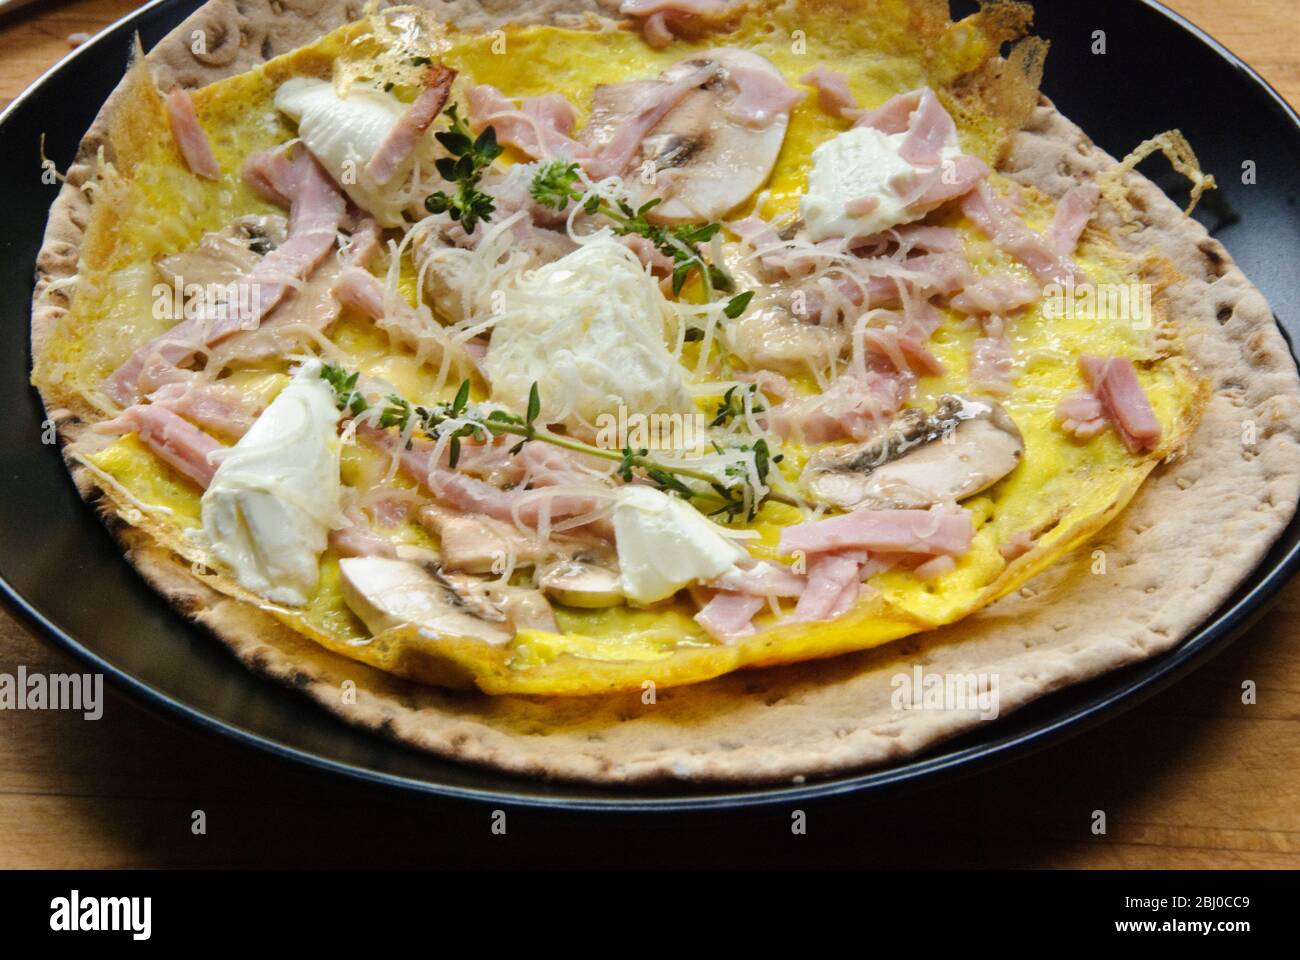 Thin pancake style omelette with mushroom, ham, goat's cheese and parmesan on thin Swedish bread before being rolled up, as a portable breakfast. - Stock Photo